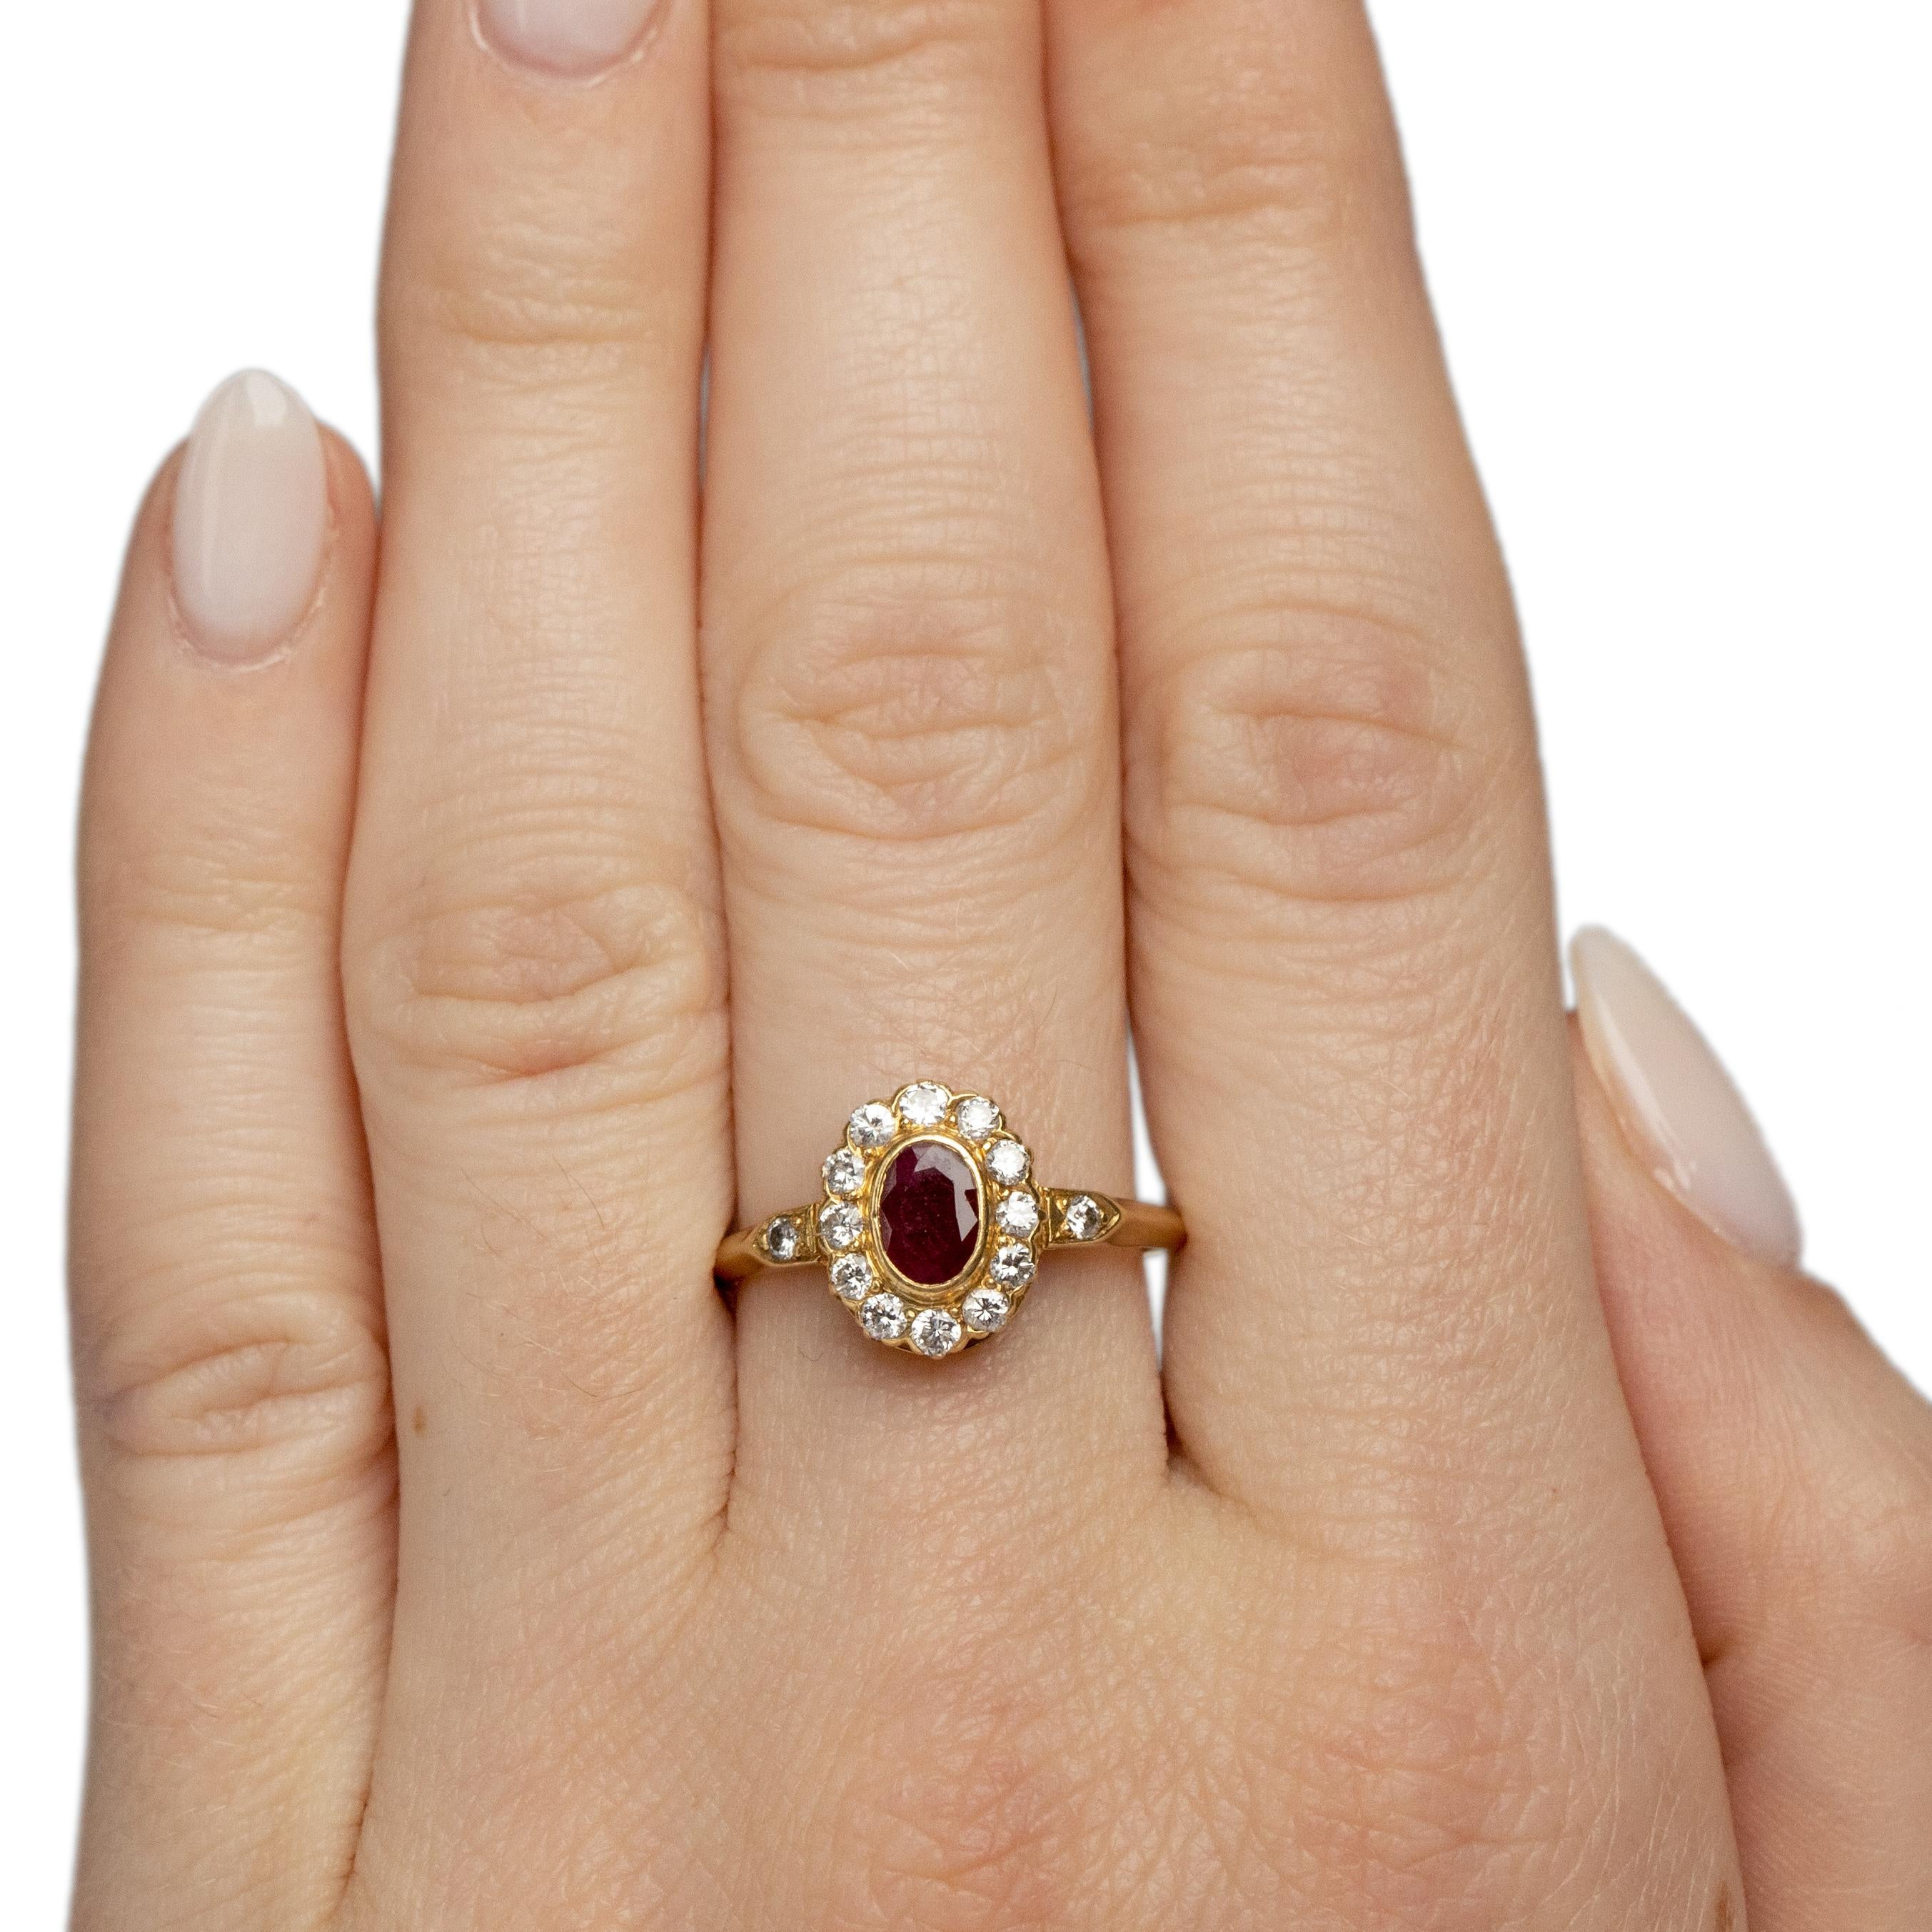 Women's 1900's Victorian 18K Yellow Gold Antique Ruby with Diamond Halo Fashion Ring